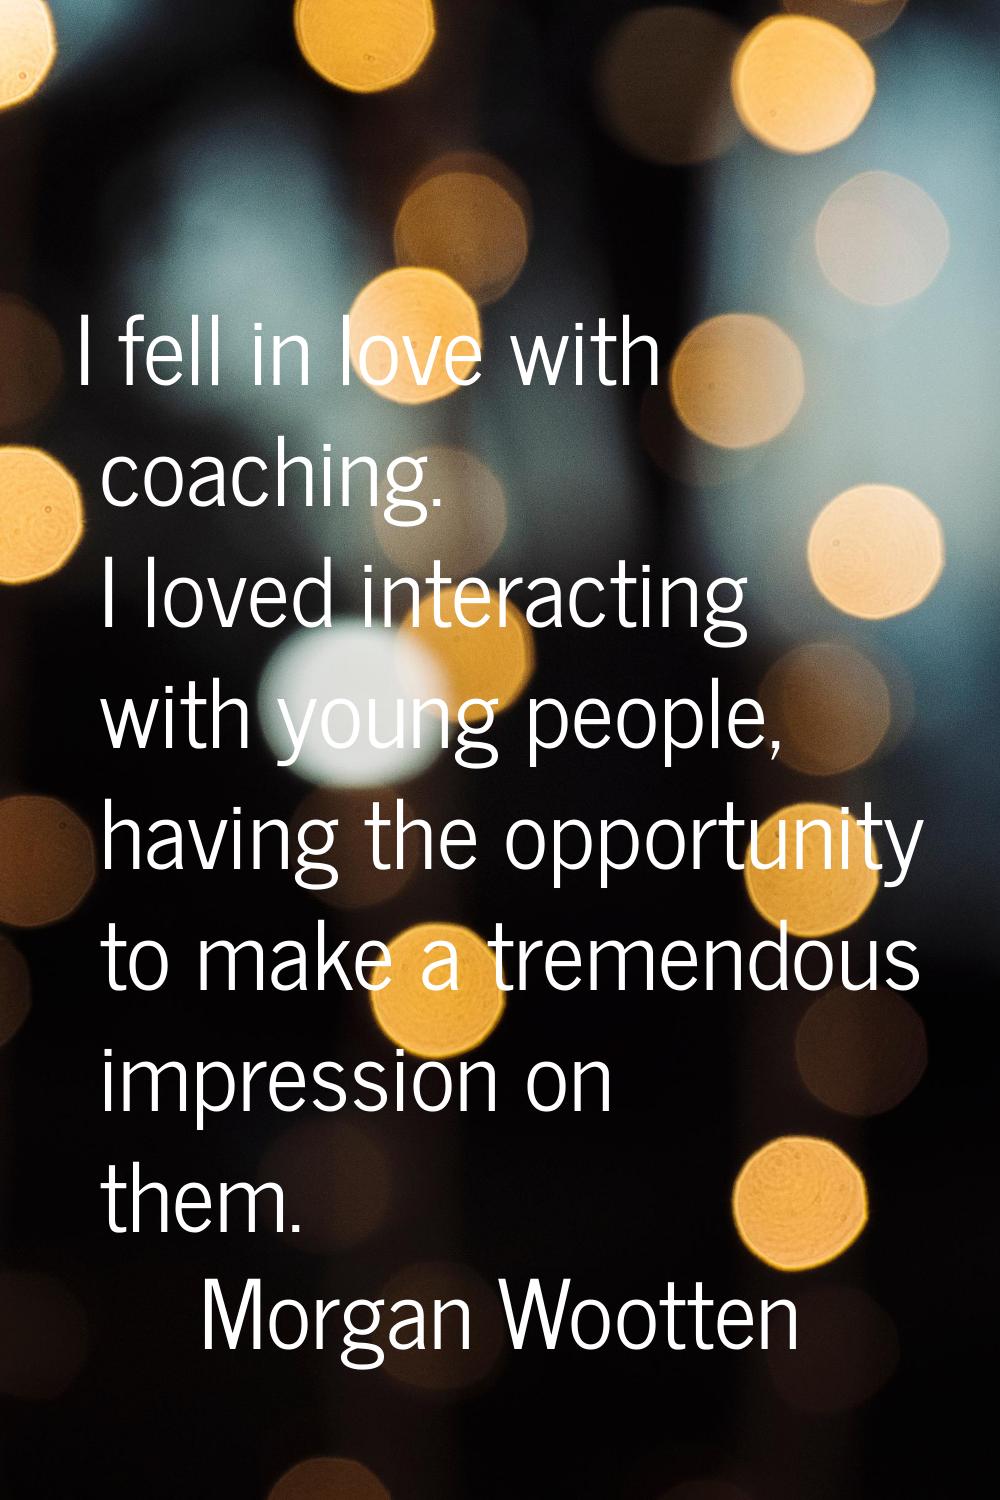 I fell in love with coaching. I loved interacting with young people, having the opportunity to make